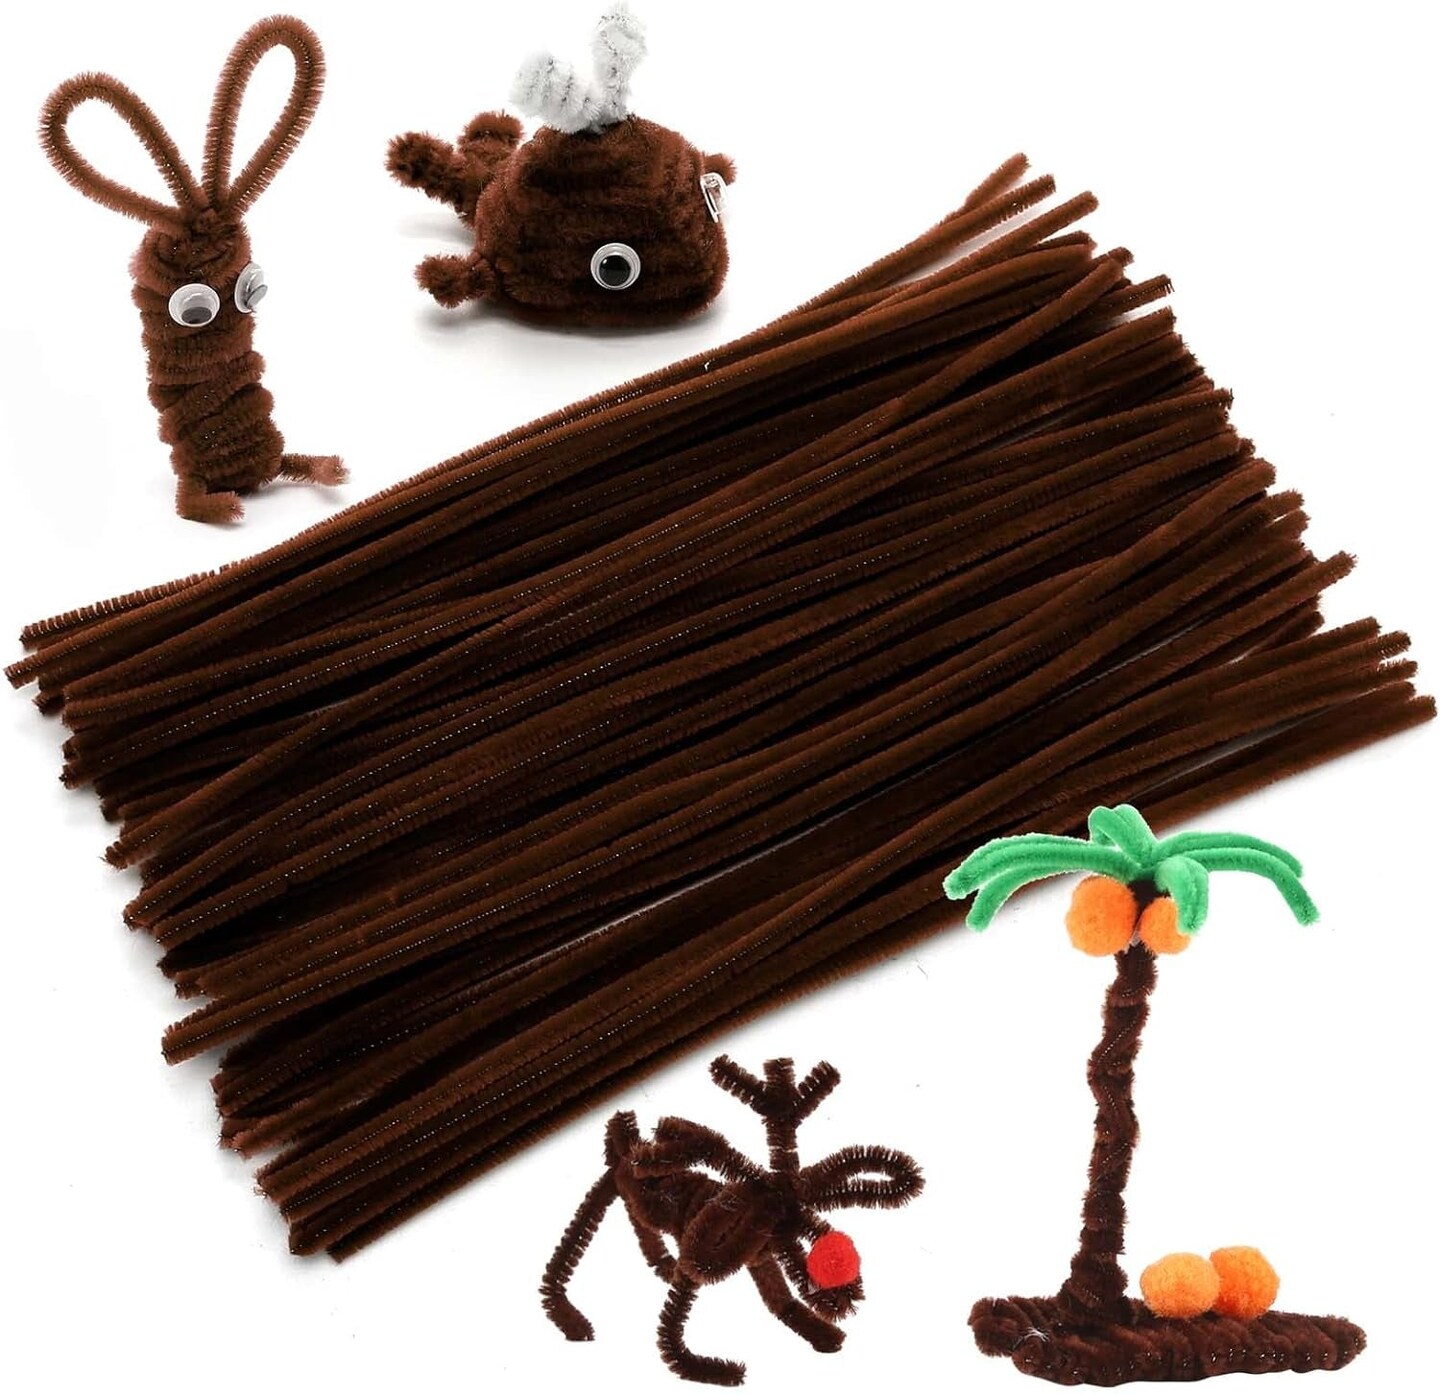 100PCS Pipe Cleaners in 10 Colors, Multi-Color Chenille Stems